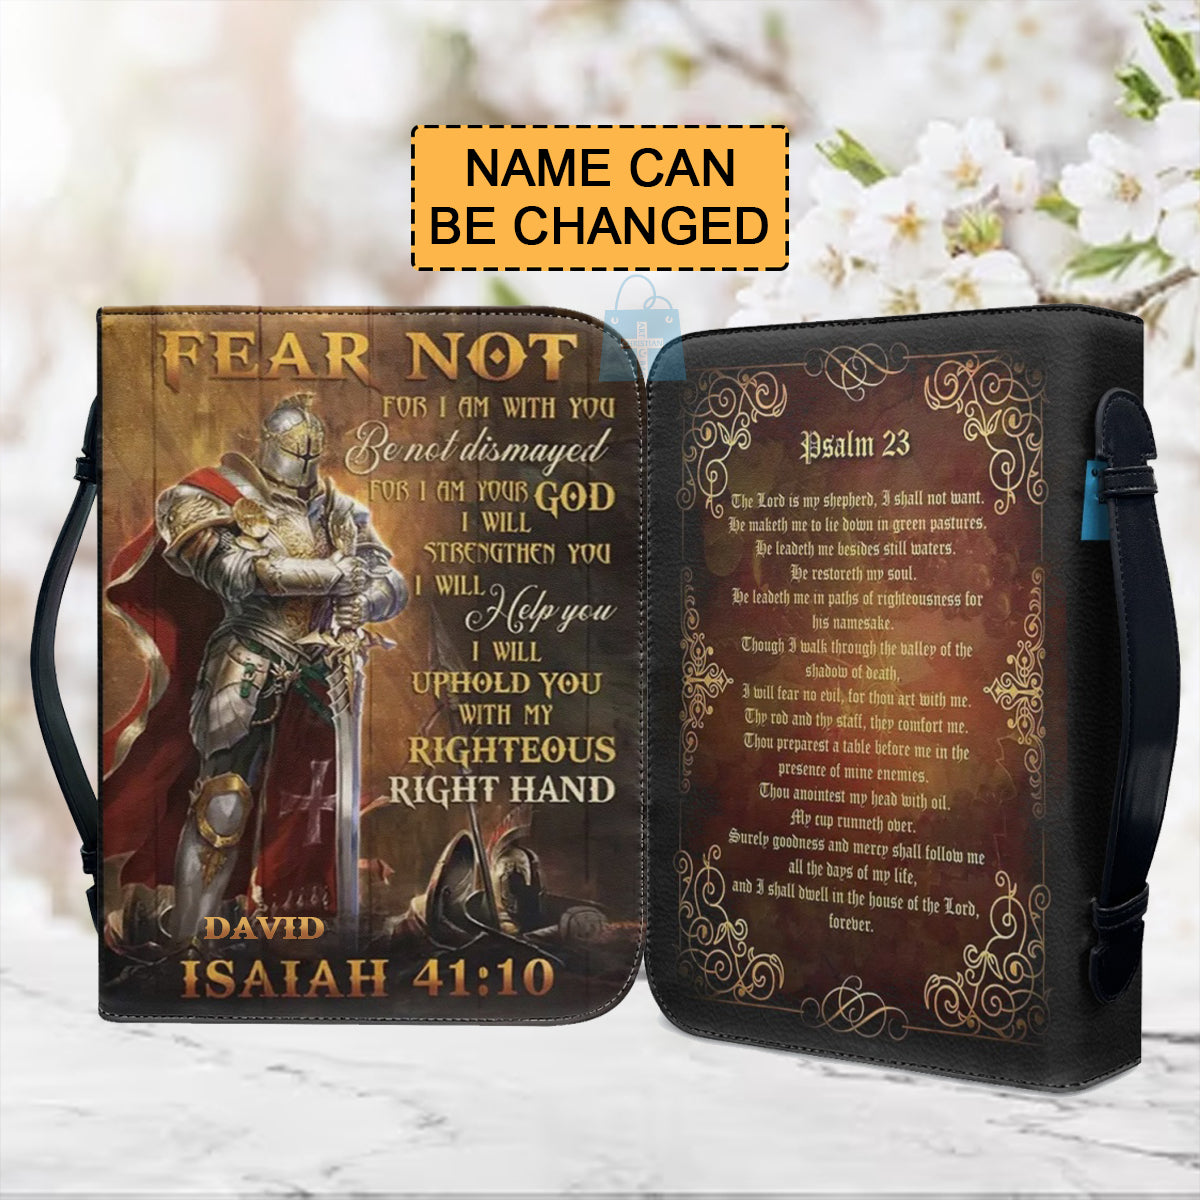 Christianartbag Bible Cover, Fear Not Isaiah 41:10 Personalized Bible Cover Purple, Warrior Bible Cover, Personalized Bible Cover, Christmas Gift, CABBBCV01021023. - Christian Art Bag